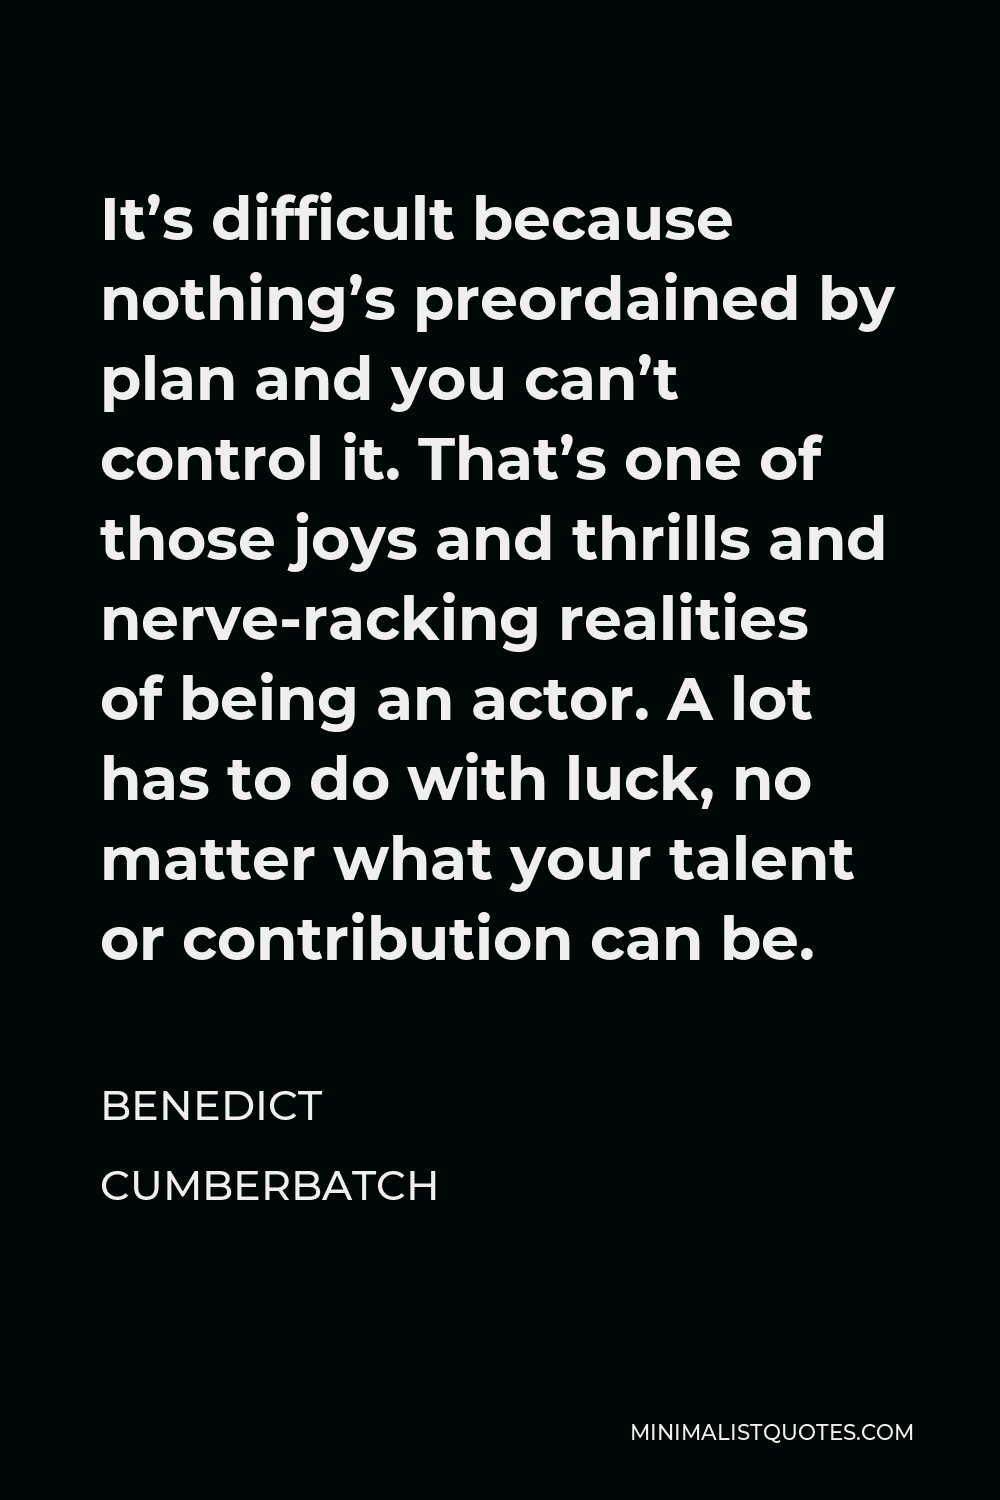 Benedict Cumberbatch Quote - It’s difficult because nothing’s preordained by plan and you can’t control it. That’s one of those joys and thrills and nerve-racking realities of being an actor. A lot has to do with luck, no matter what your talent or contribution can be.